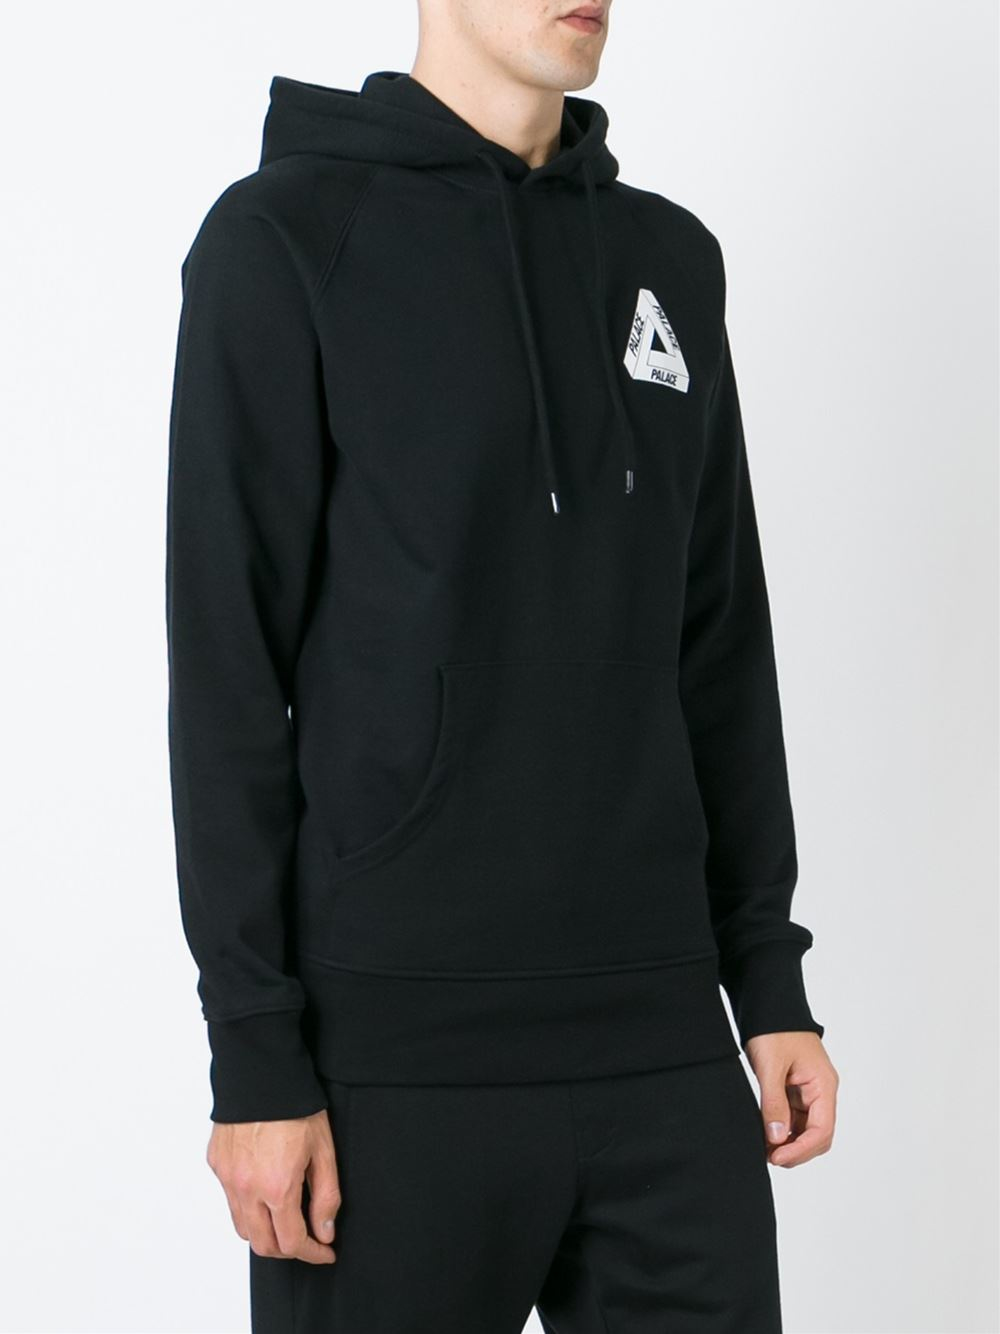 Lyst - Palace Back Logo Print Hoodie in Black for Men